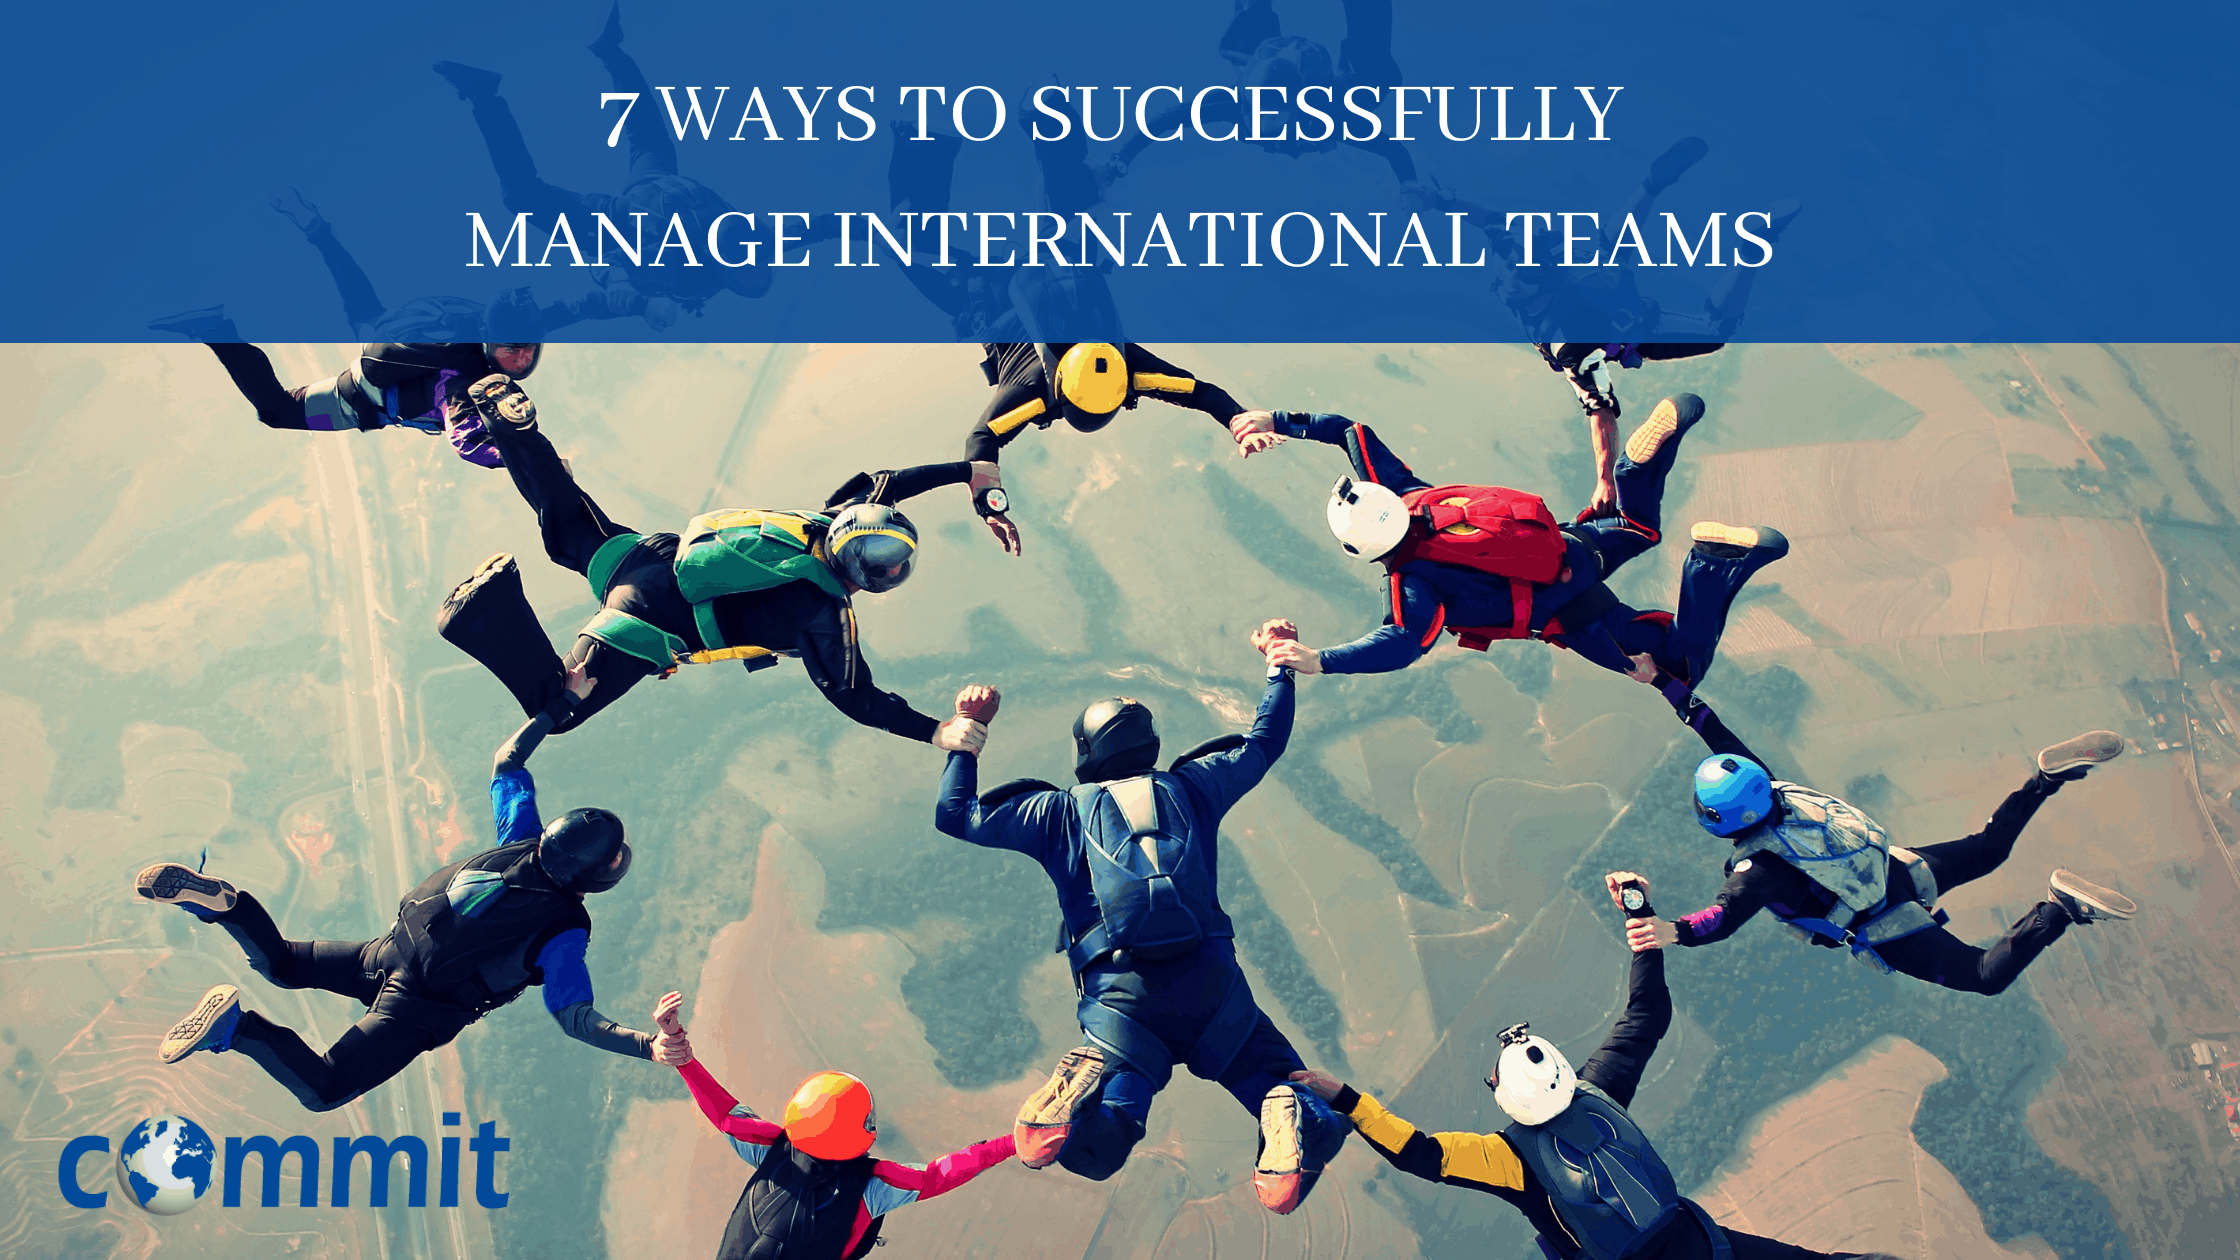 7 Ways to Successfully Manage International Teams